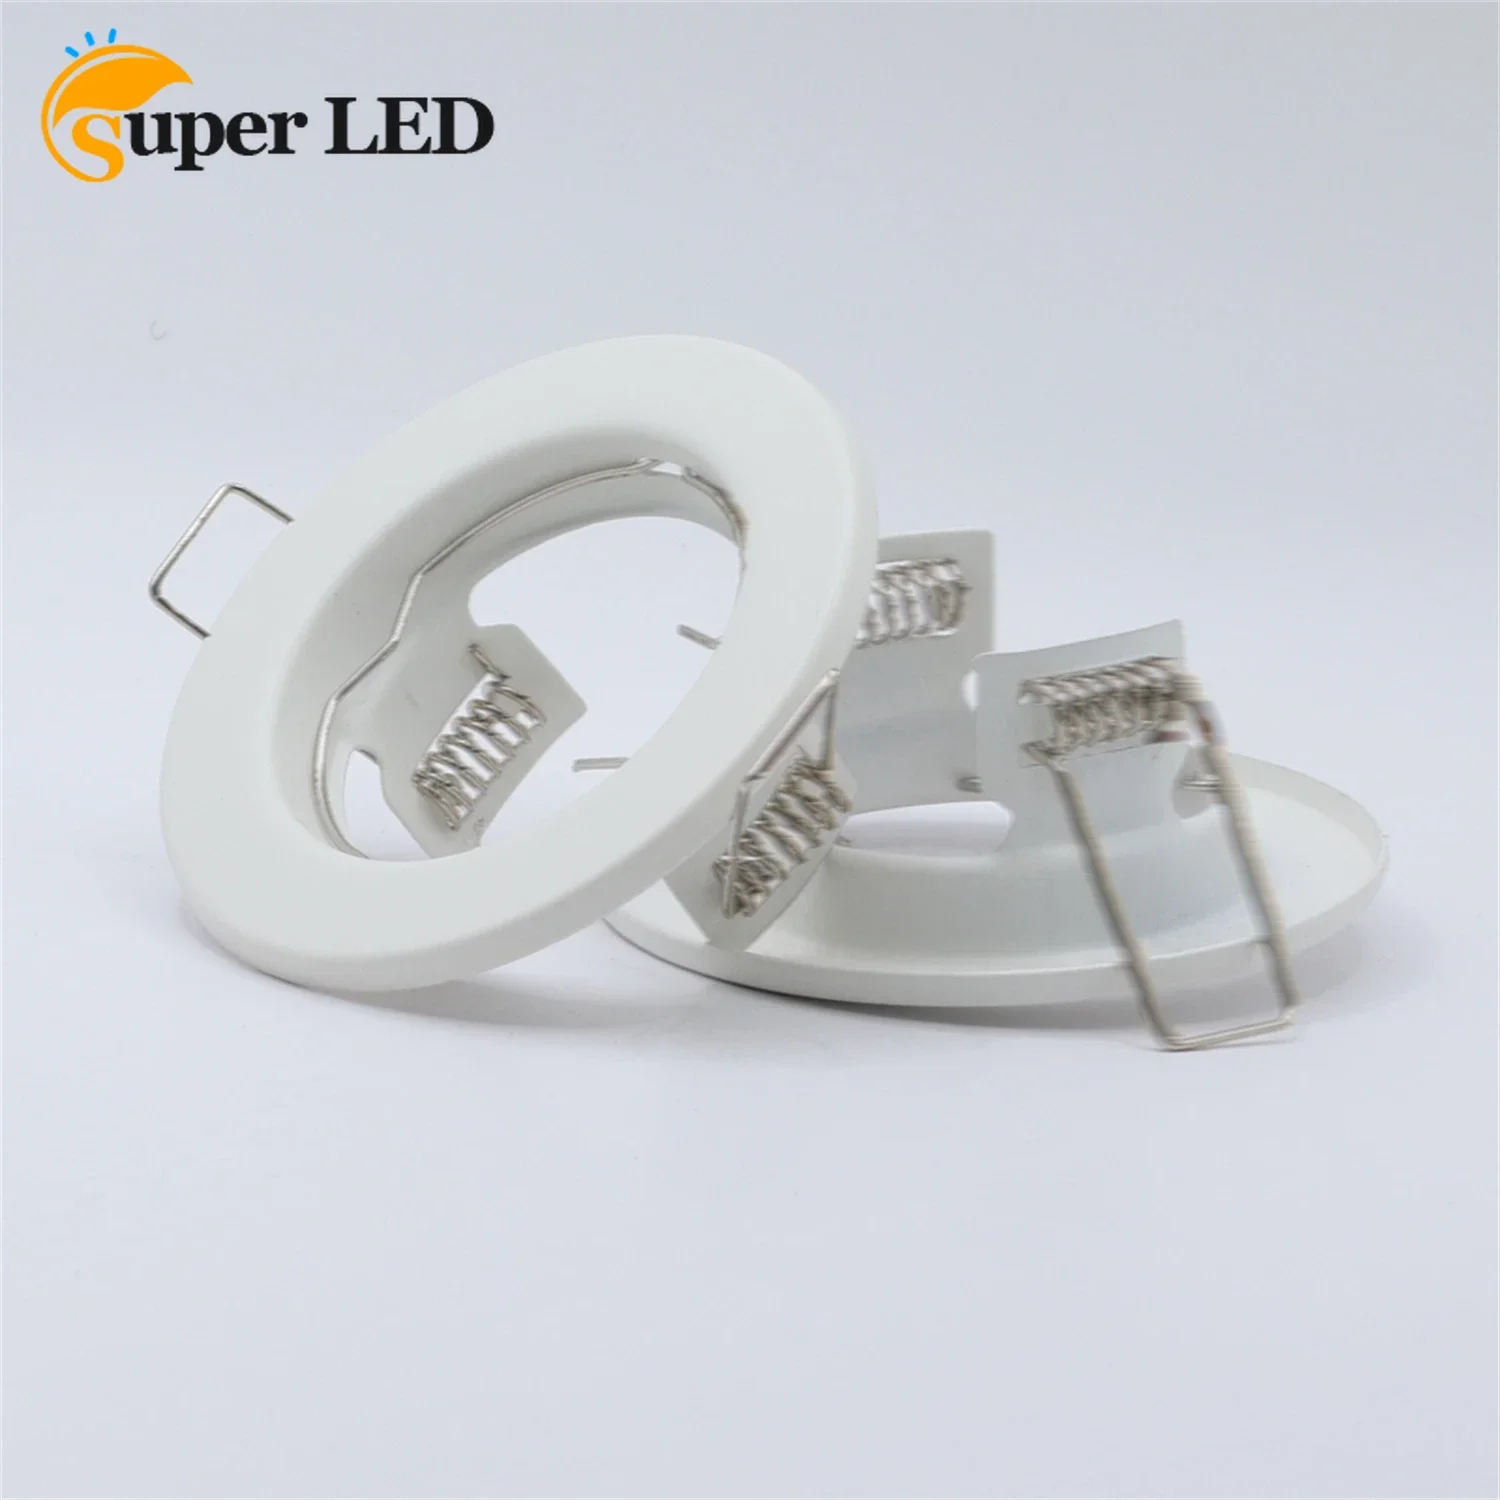 

JOYINLED LED GU10 MR16 Cut out 60mm Recessed Round Downlight Ceiling Spotlight Downlight Commercial Lighting for Hotel